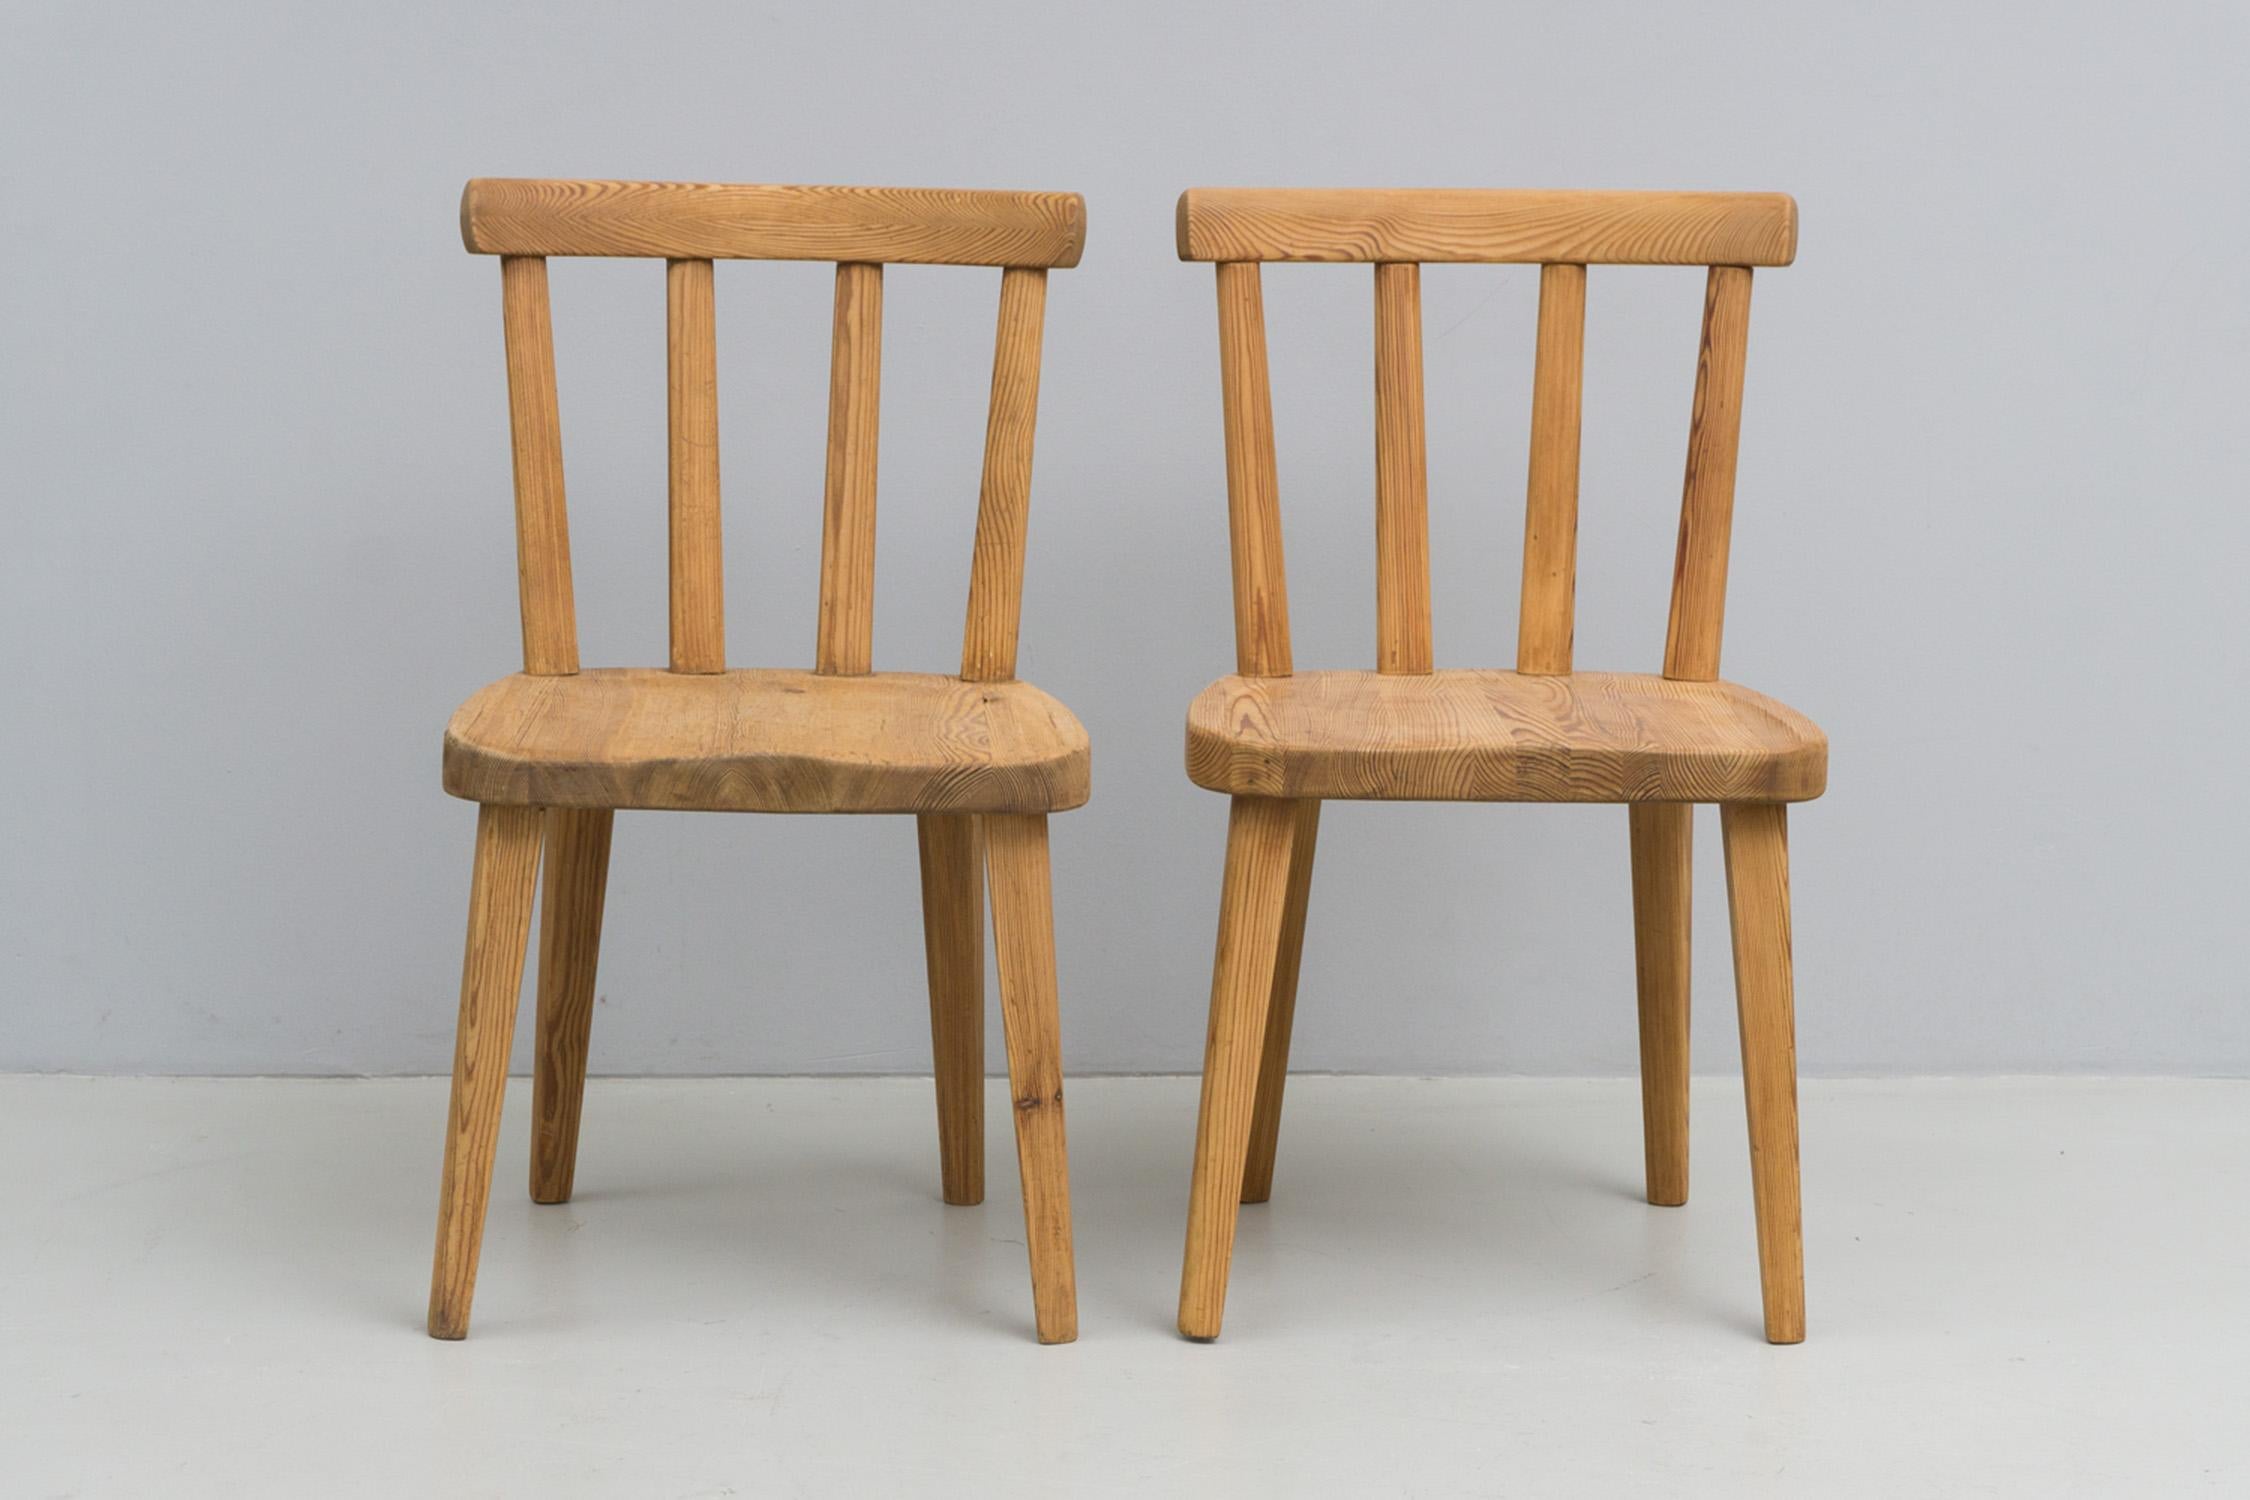 Mid-20th Century Set of Swedish Pine Wood Chairs, 'Uto' by Axel Einar Hjorth, 1930 For Sale